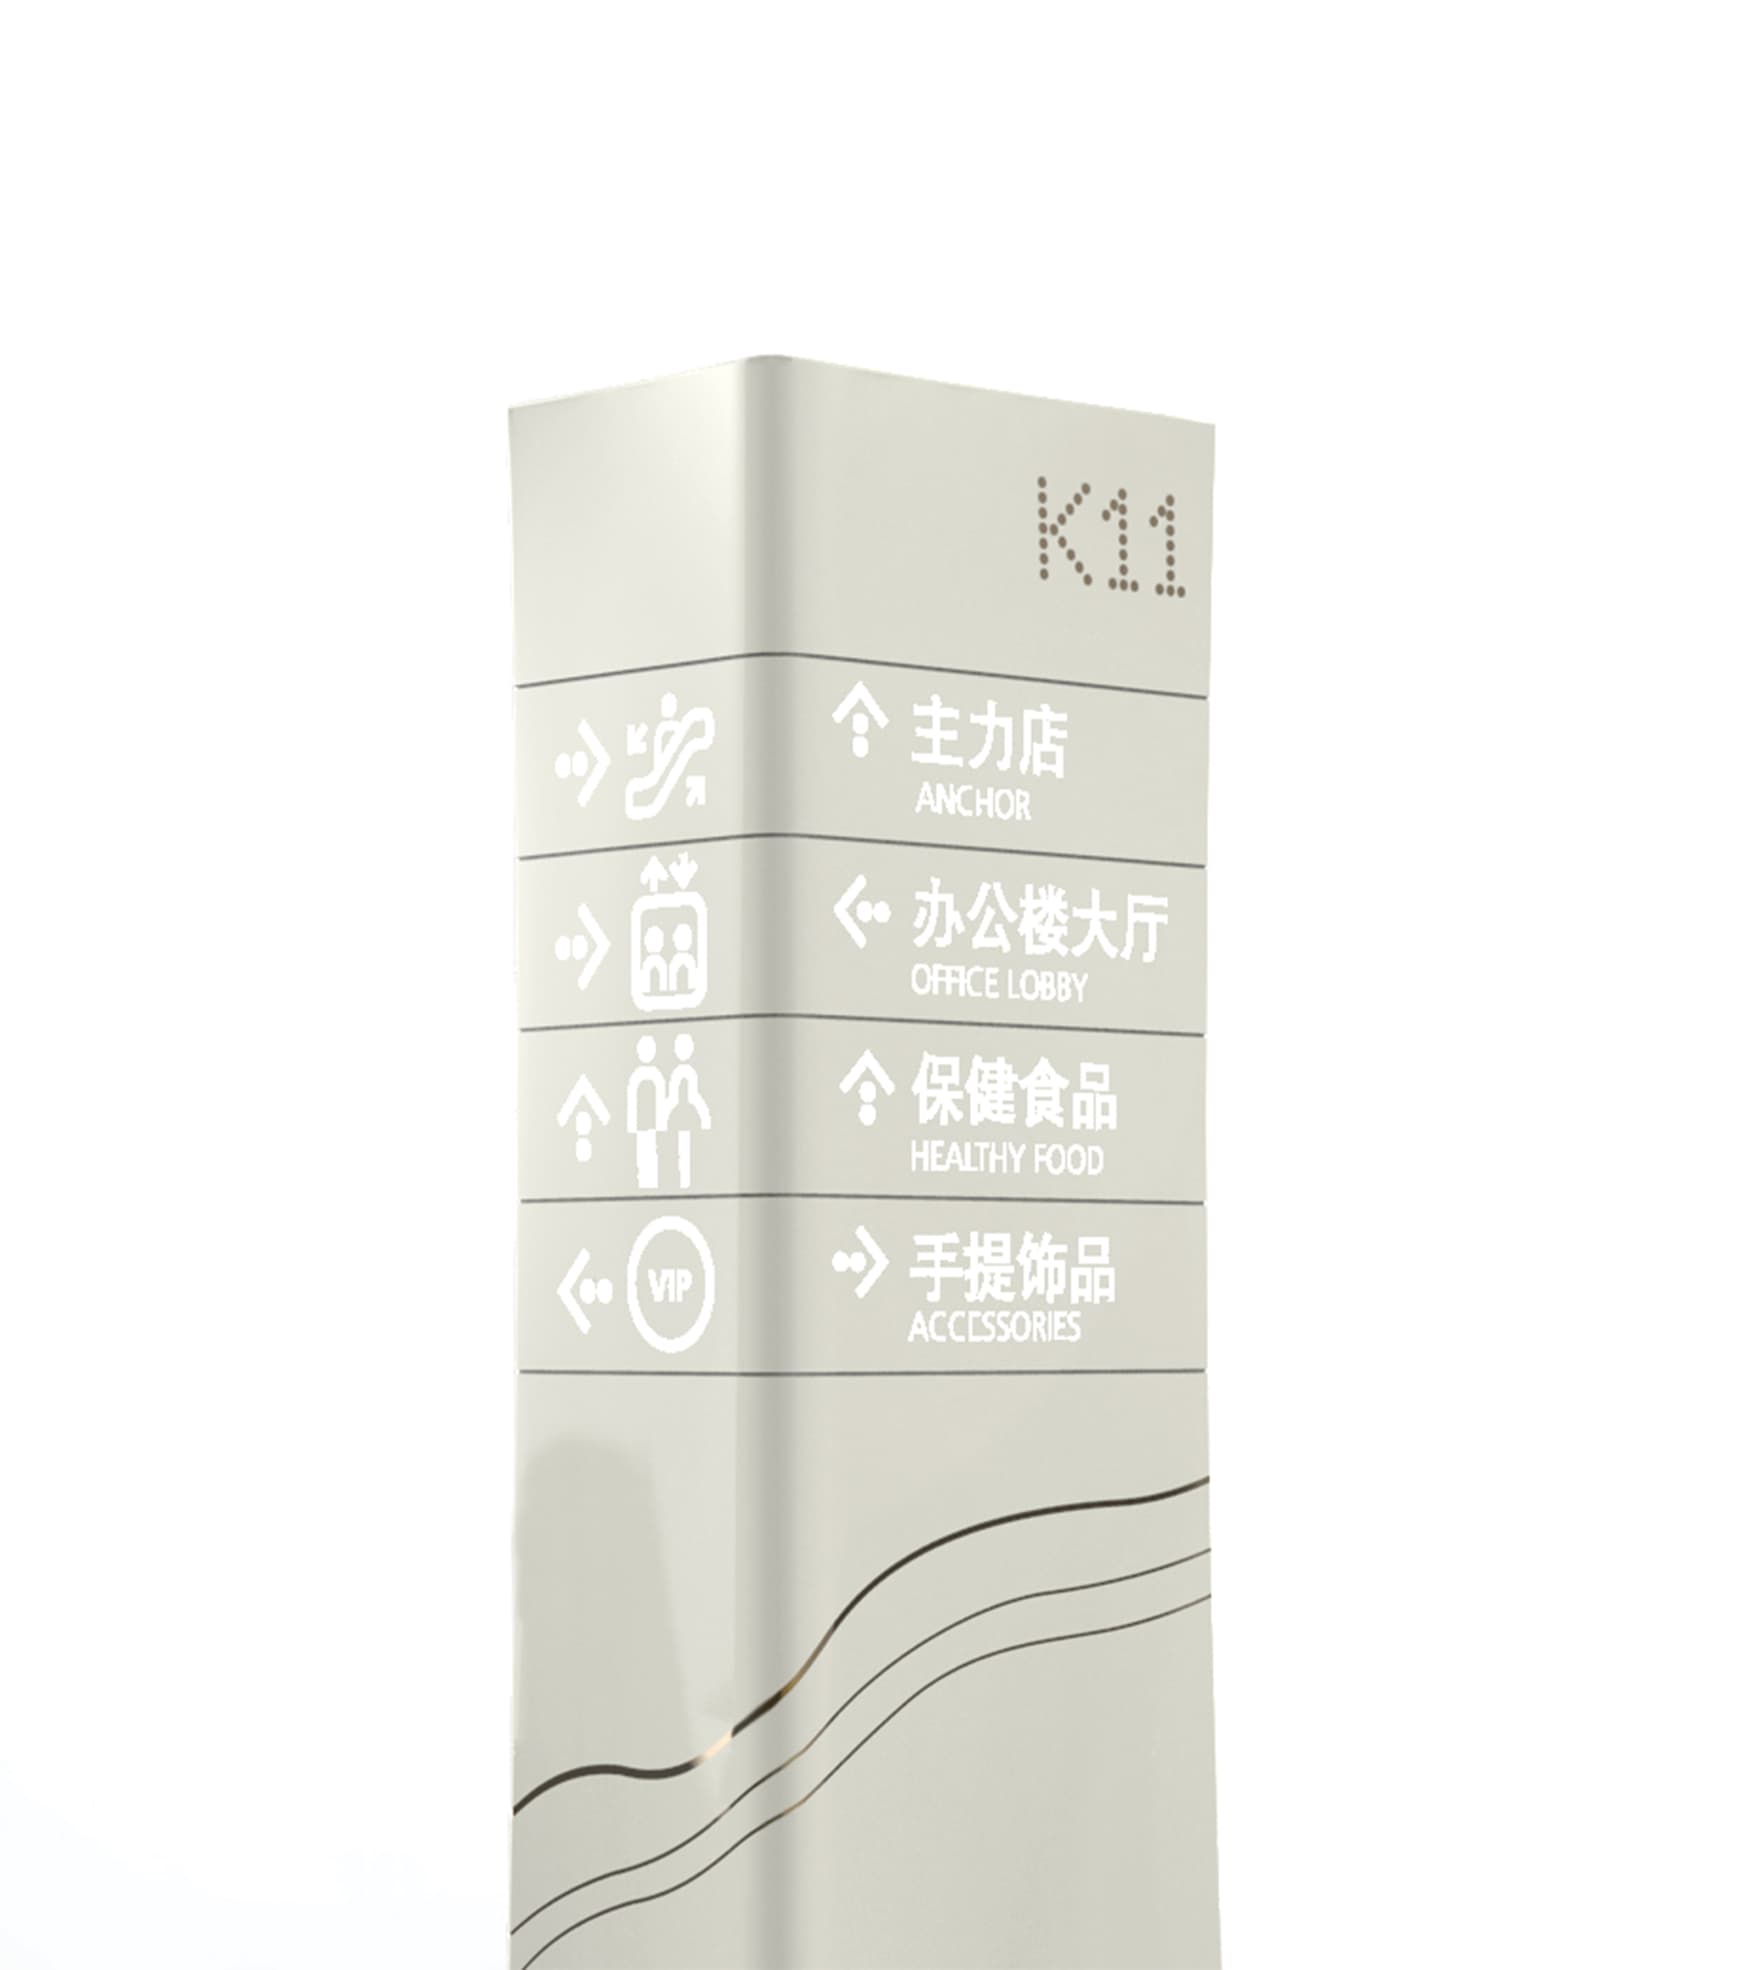 RSM Design created a beautiful pedestrian wayfinding system for K11, located in Tianjin, China, is a super high-rise complex development